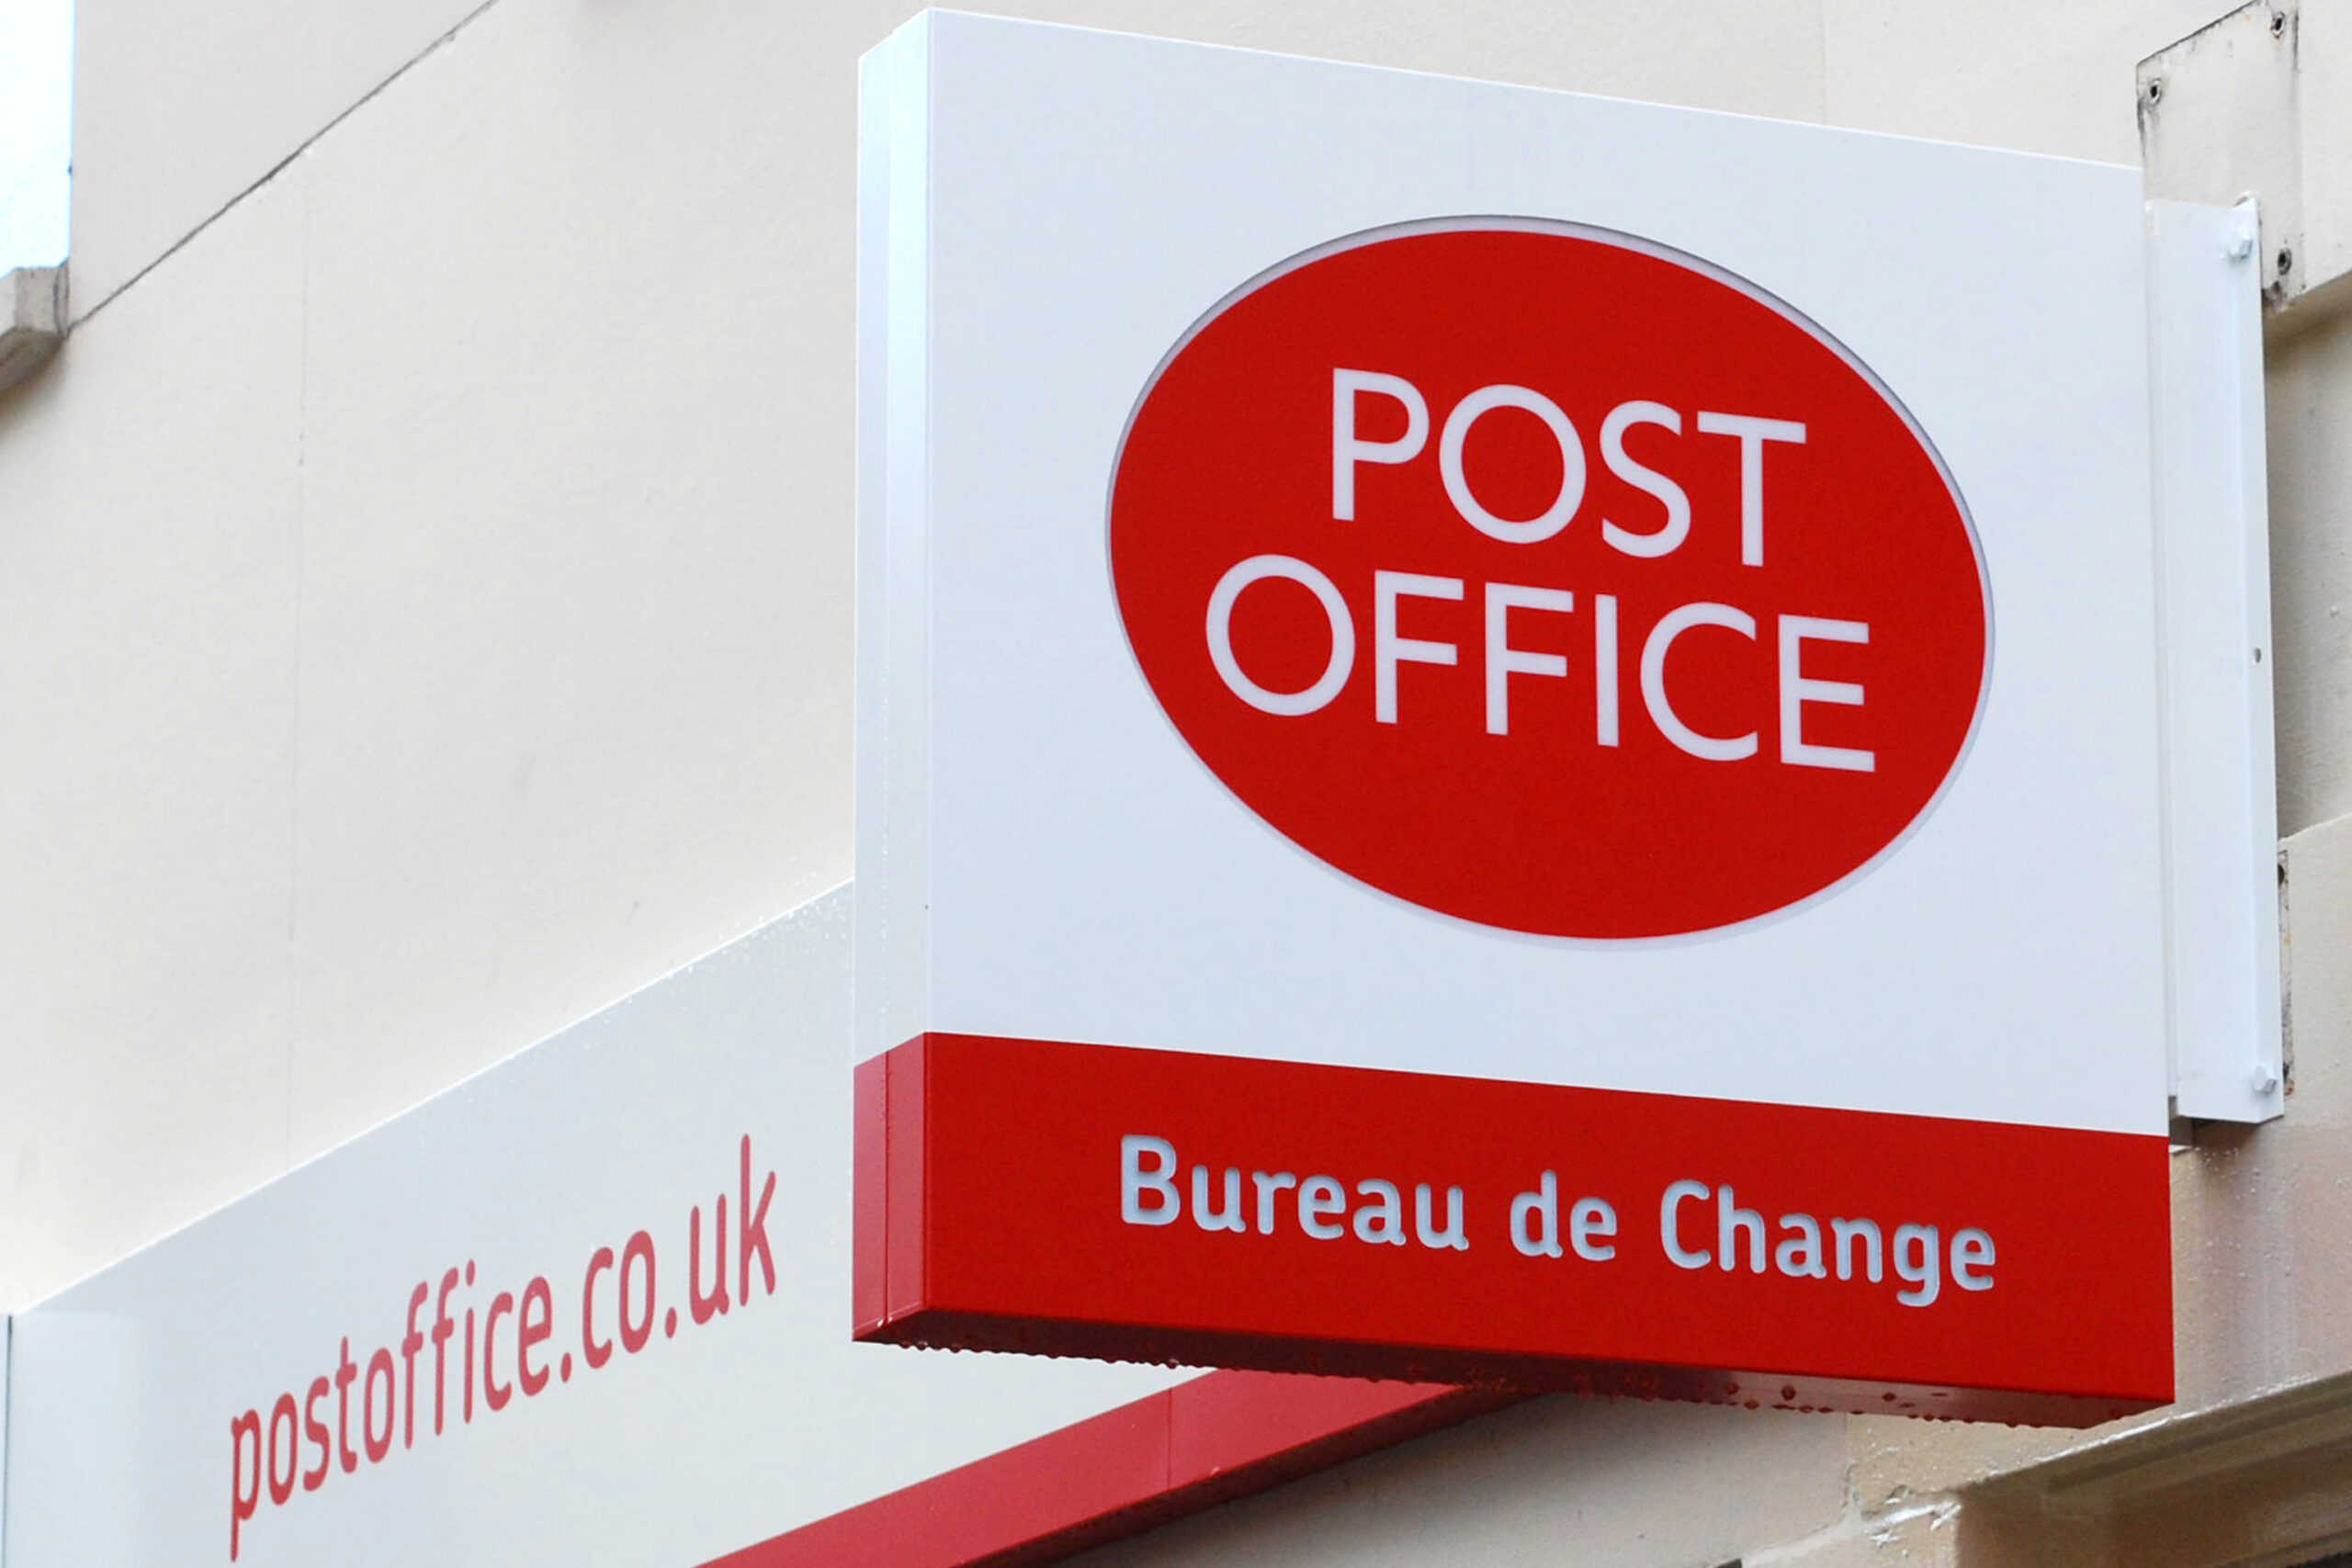 Post Office ‘paid out cash bonuses’ for every subpostmaster convicted during Horizon scandal